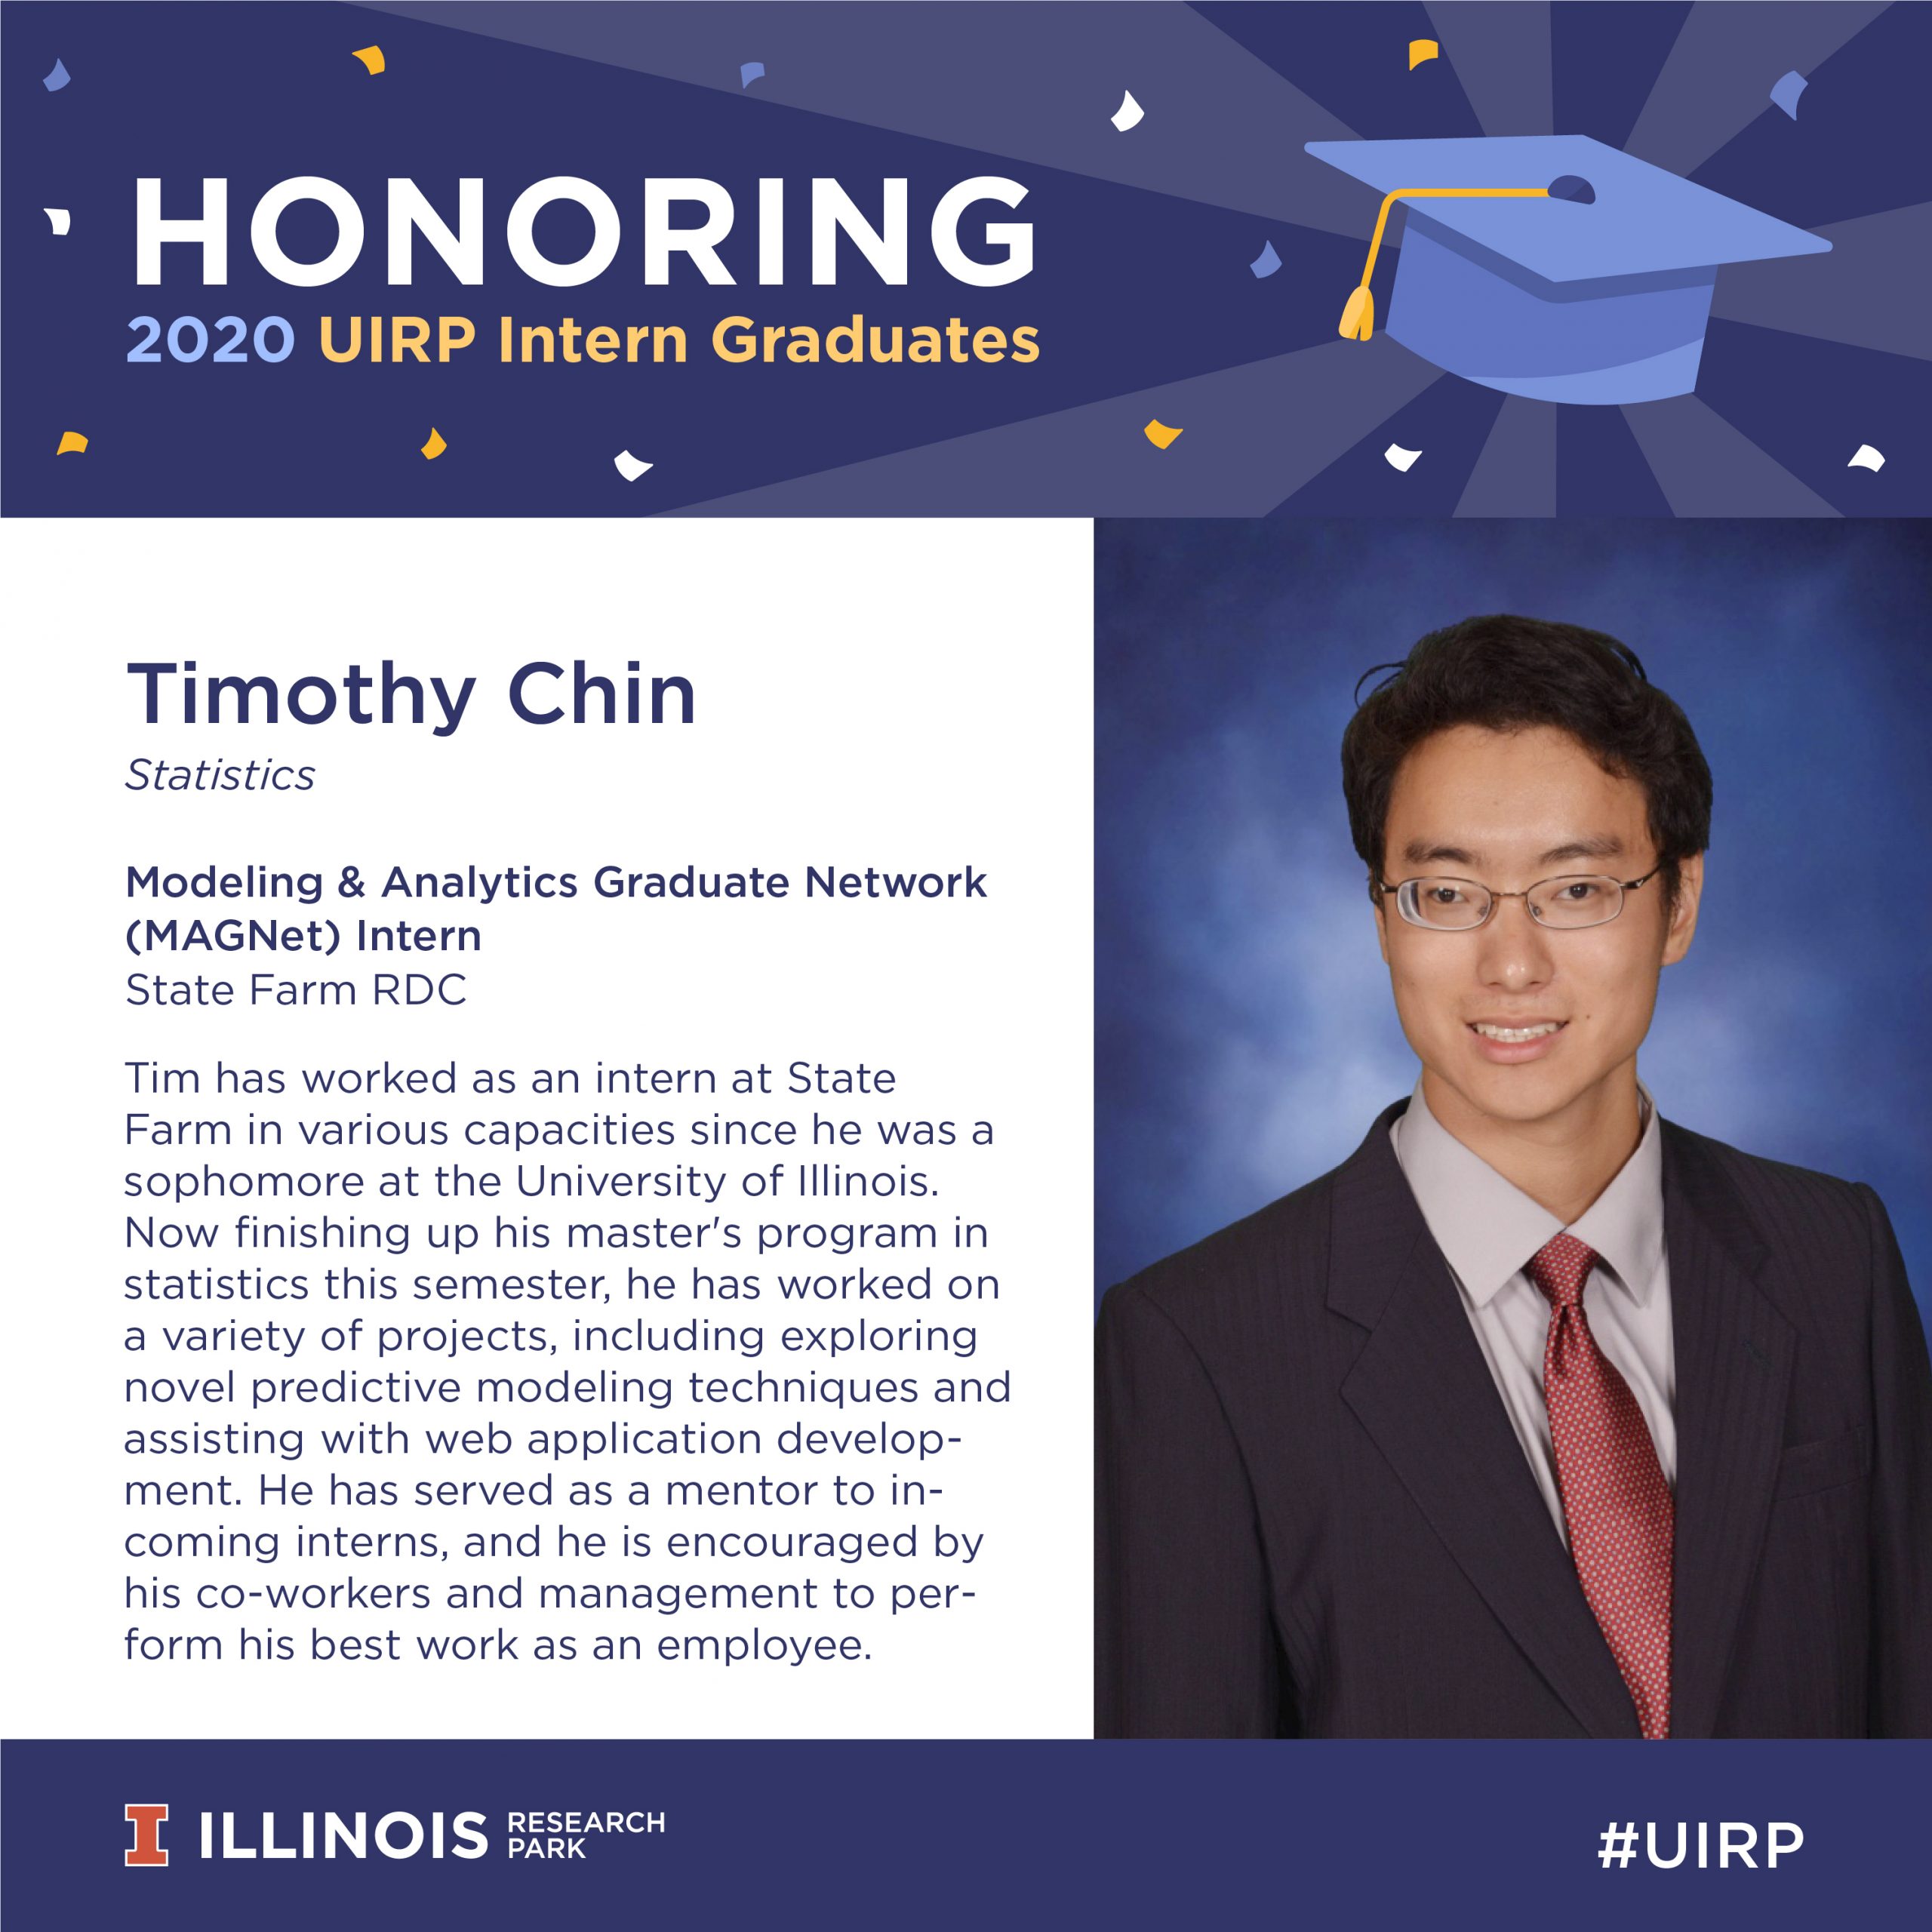 Timothy Chin, Modeling and Analytics Graduate Network Intern at State Farm